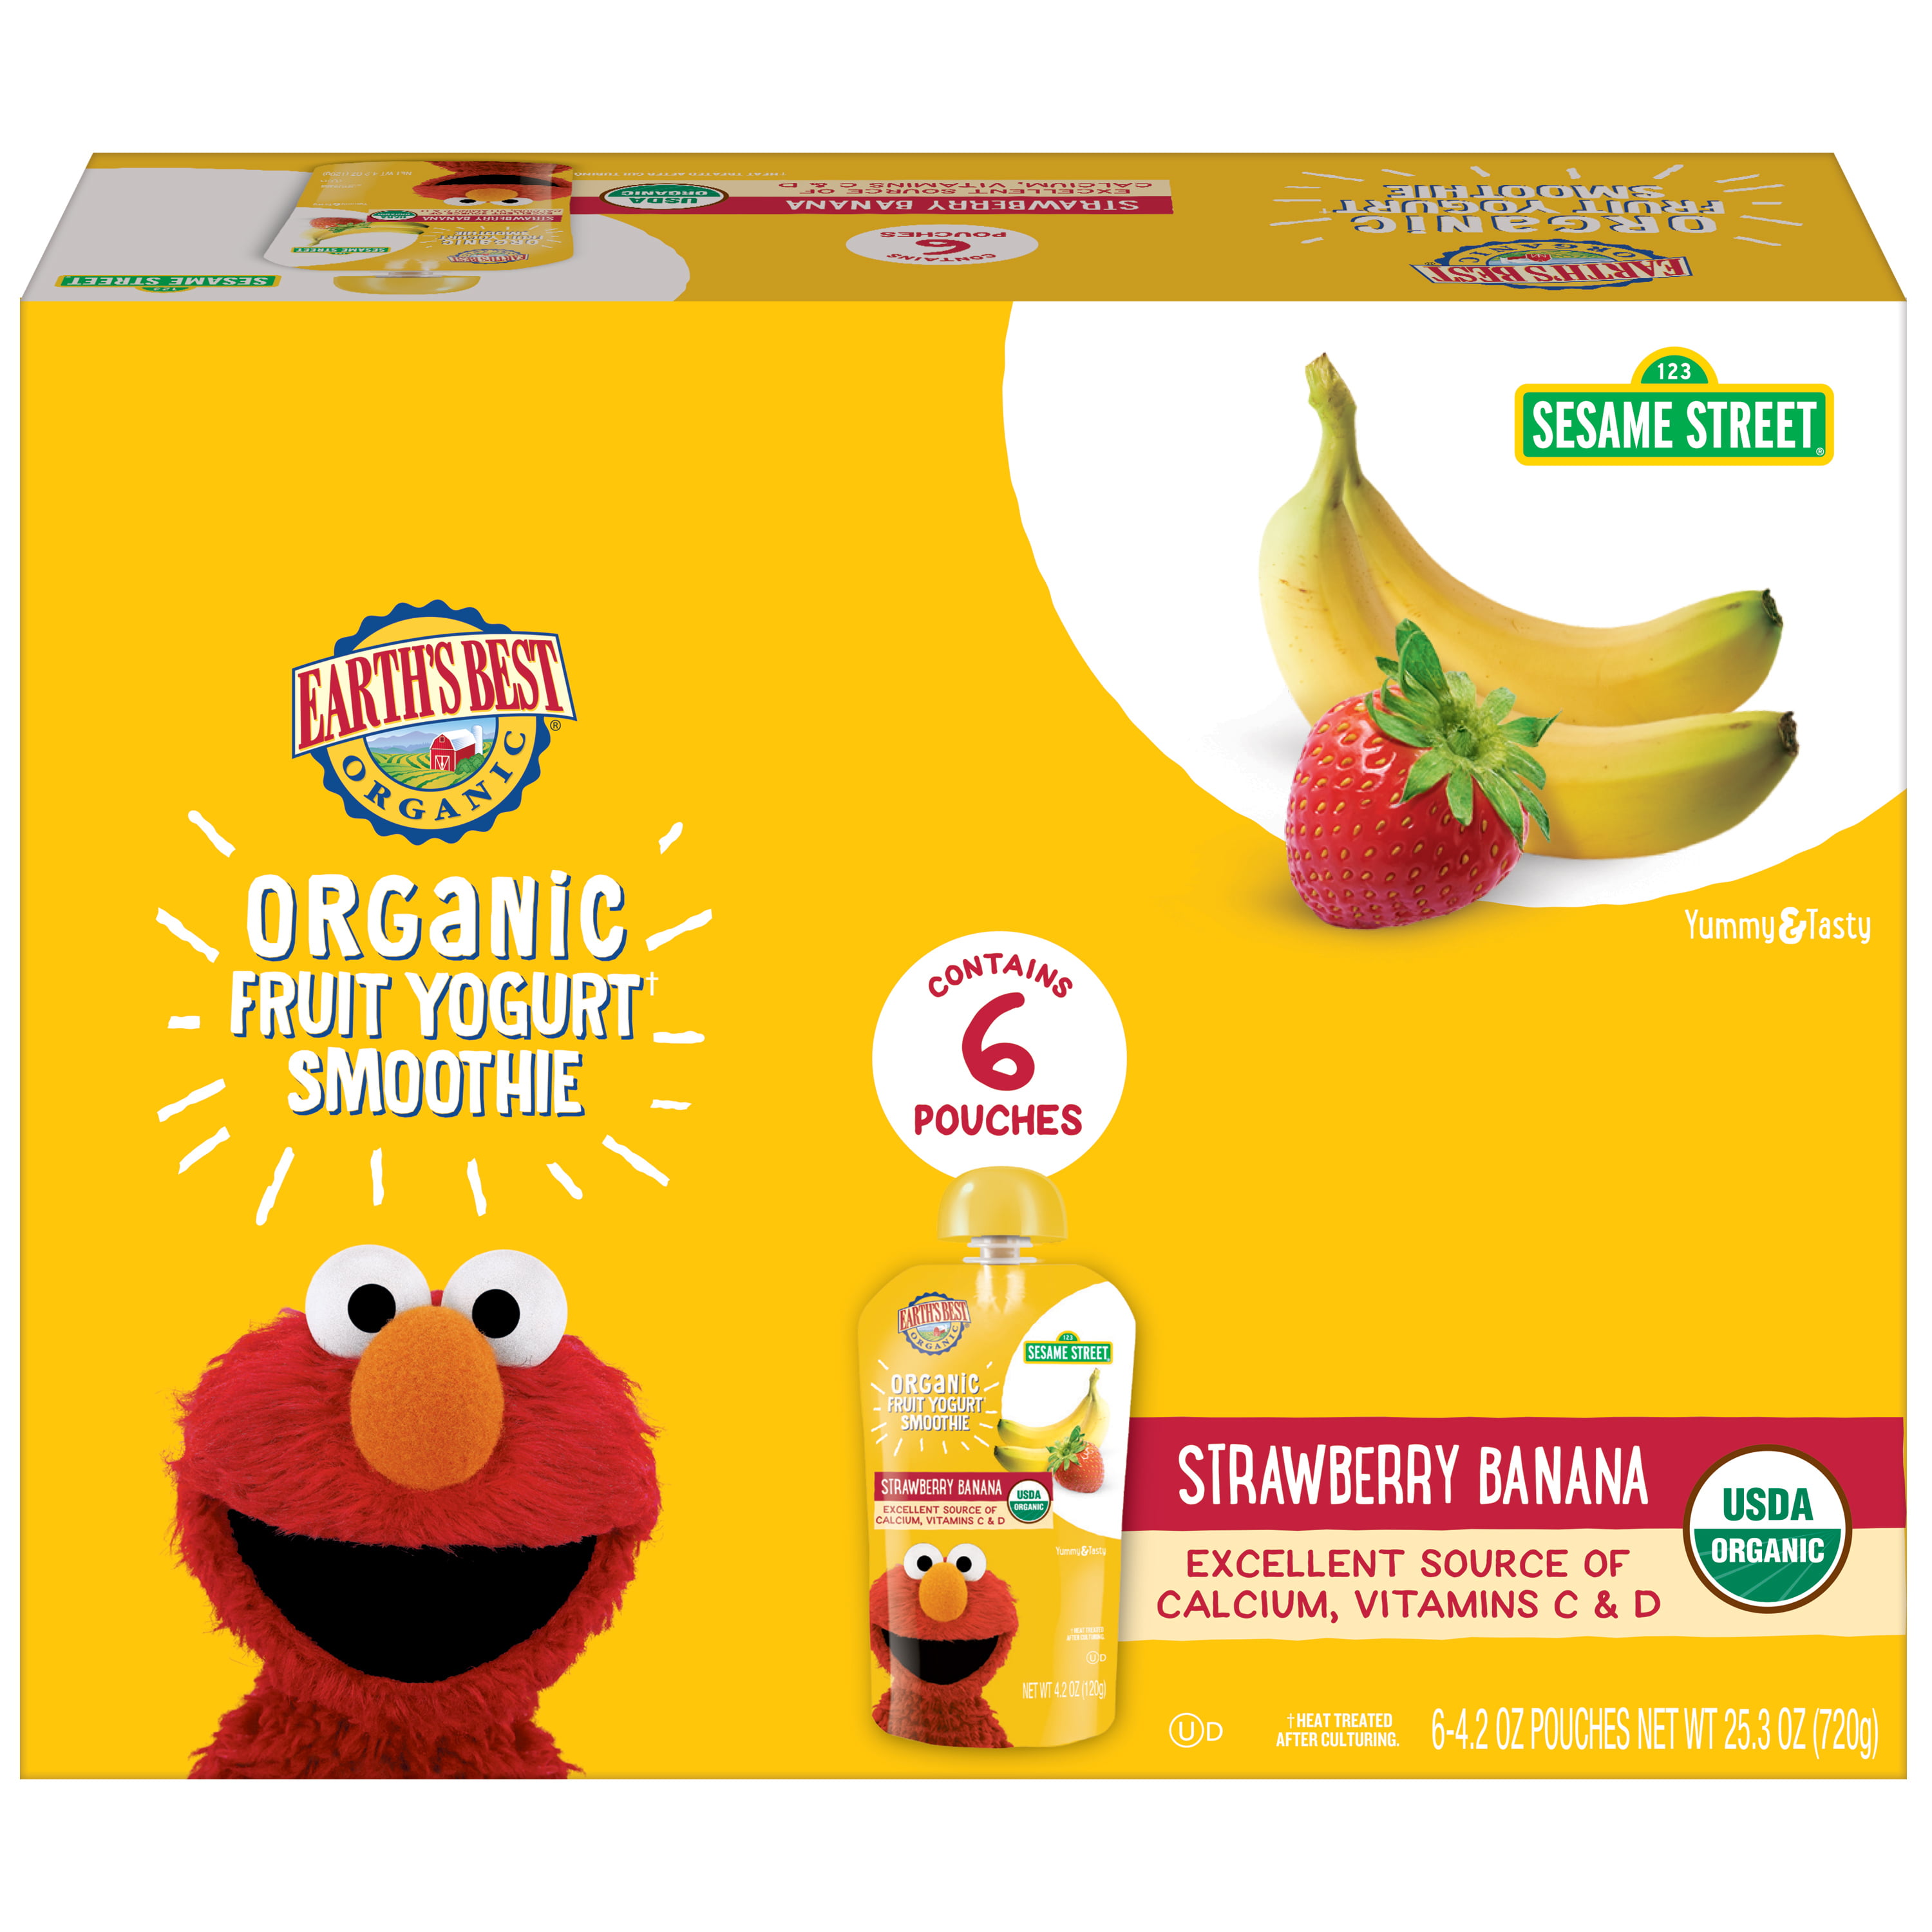 Photo 1 of (6 Pack) Earth's Best Organic Sesame Street, Strawberry Banana Toddler Fruit Yogurt Smoothie, 4.2 oz. Pouch
2 ct